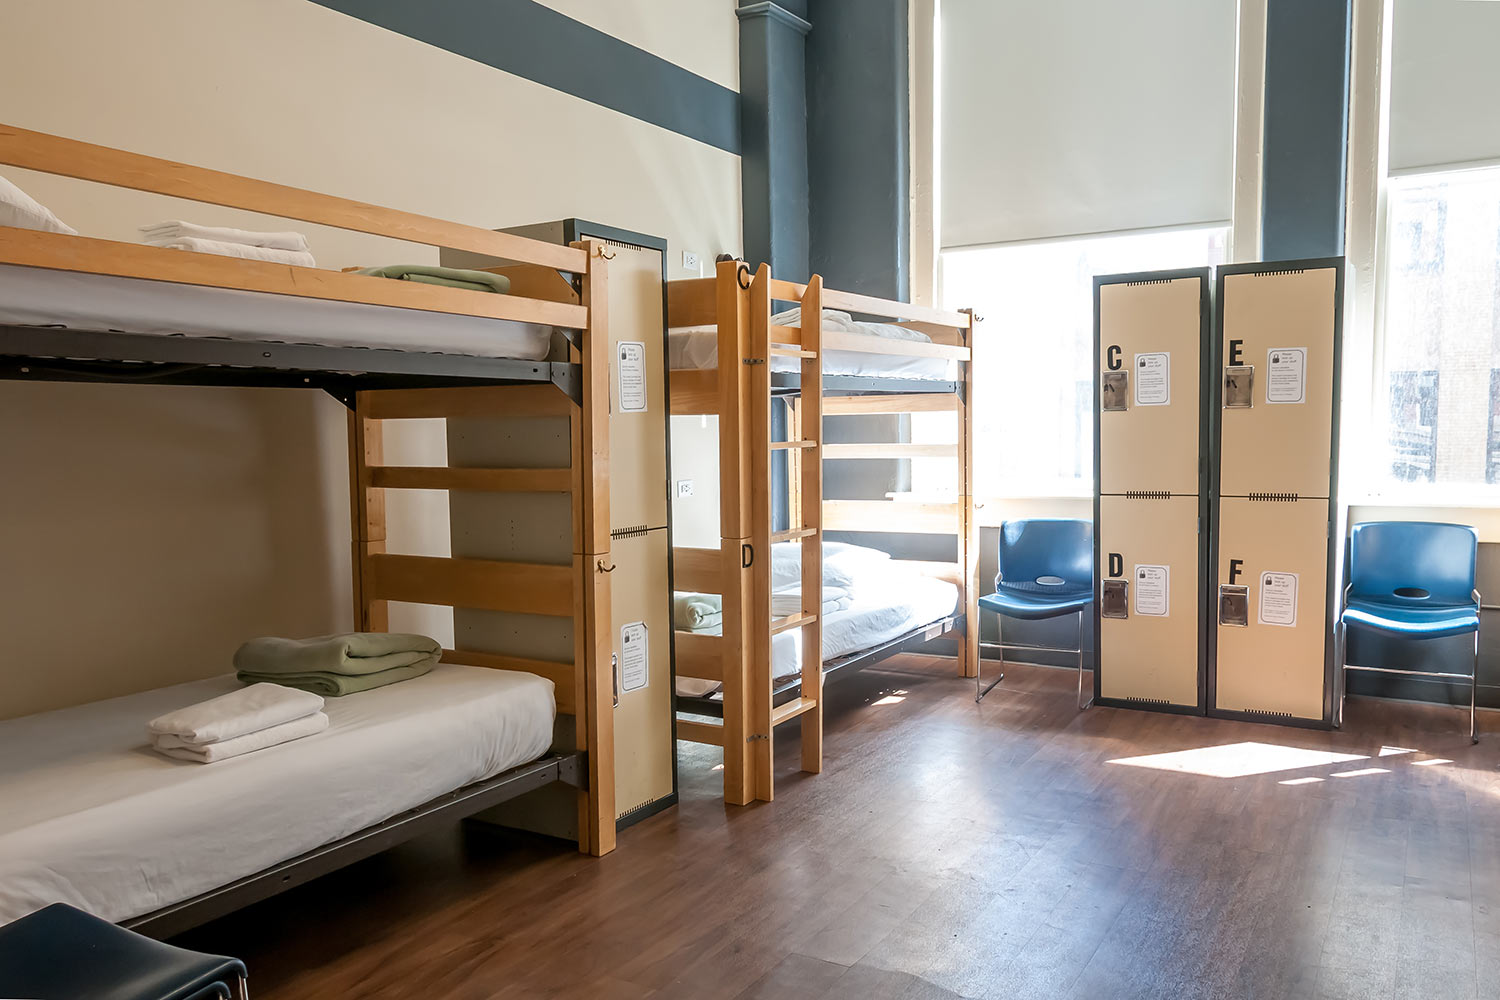 a small dorm room at HI Chicago hostel with two sets of bunk beds and four secure lockers for guests' belongings. There are two large windows with blinds that can be adjusted to let in light.